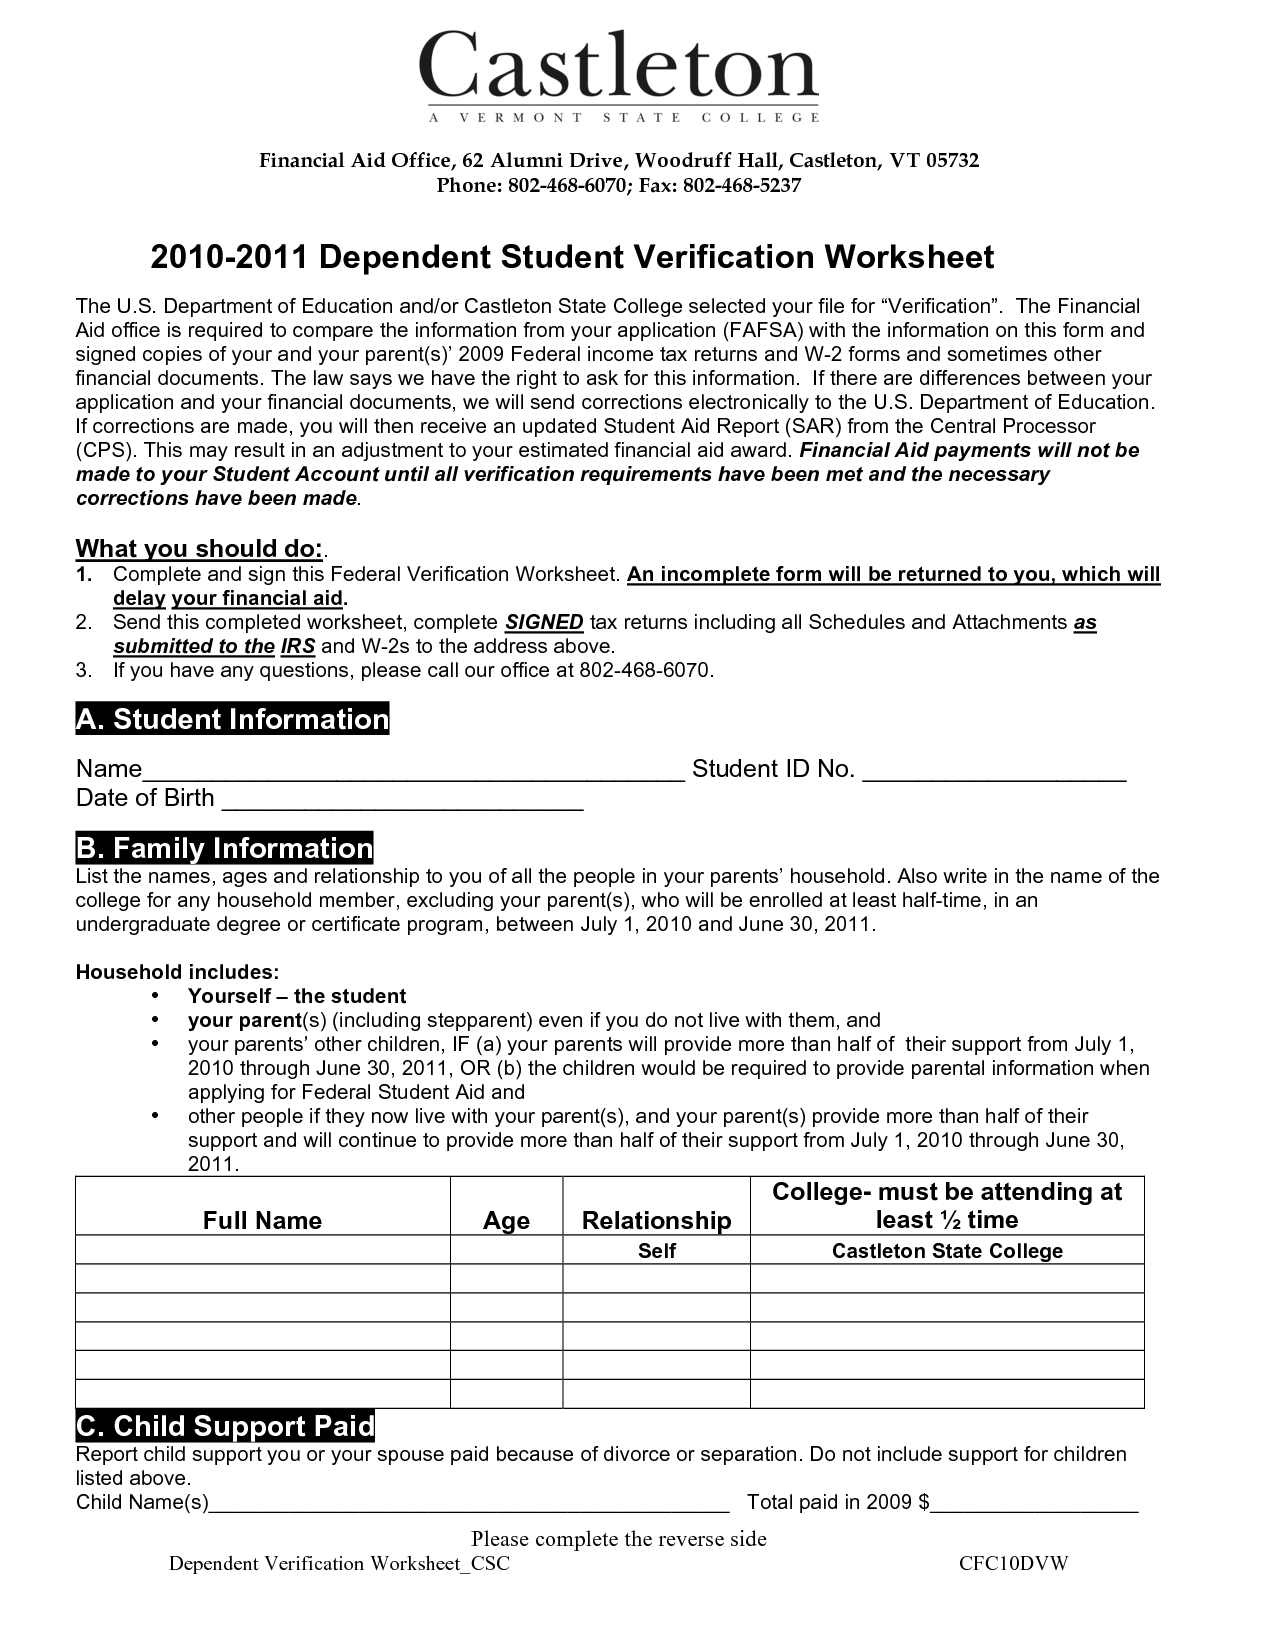 16 Best Images Of College Financial Aid Worksheet Budget Worksheet Financial Aid Financial